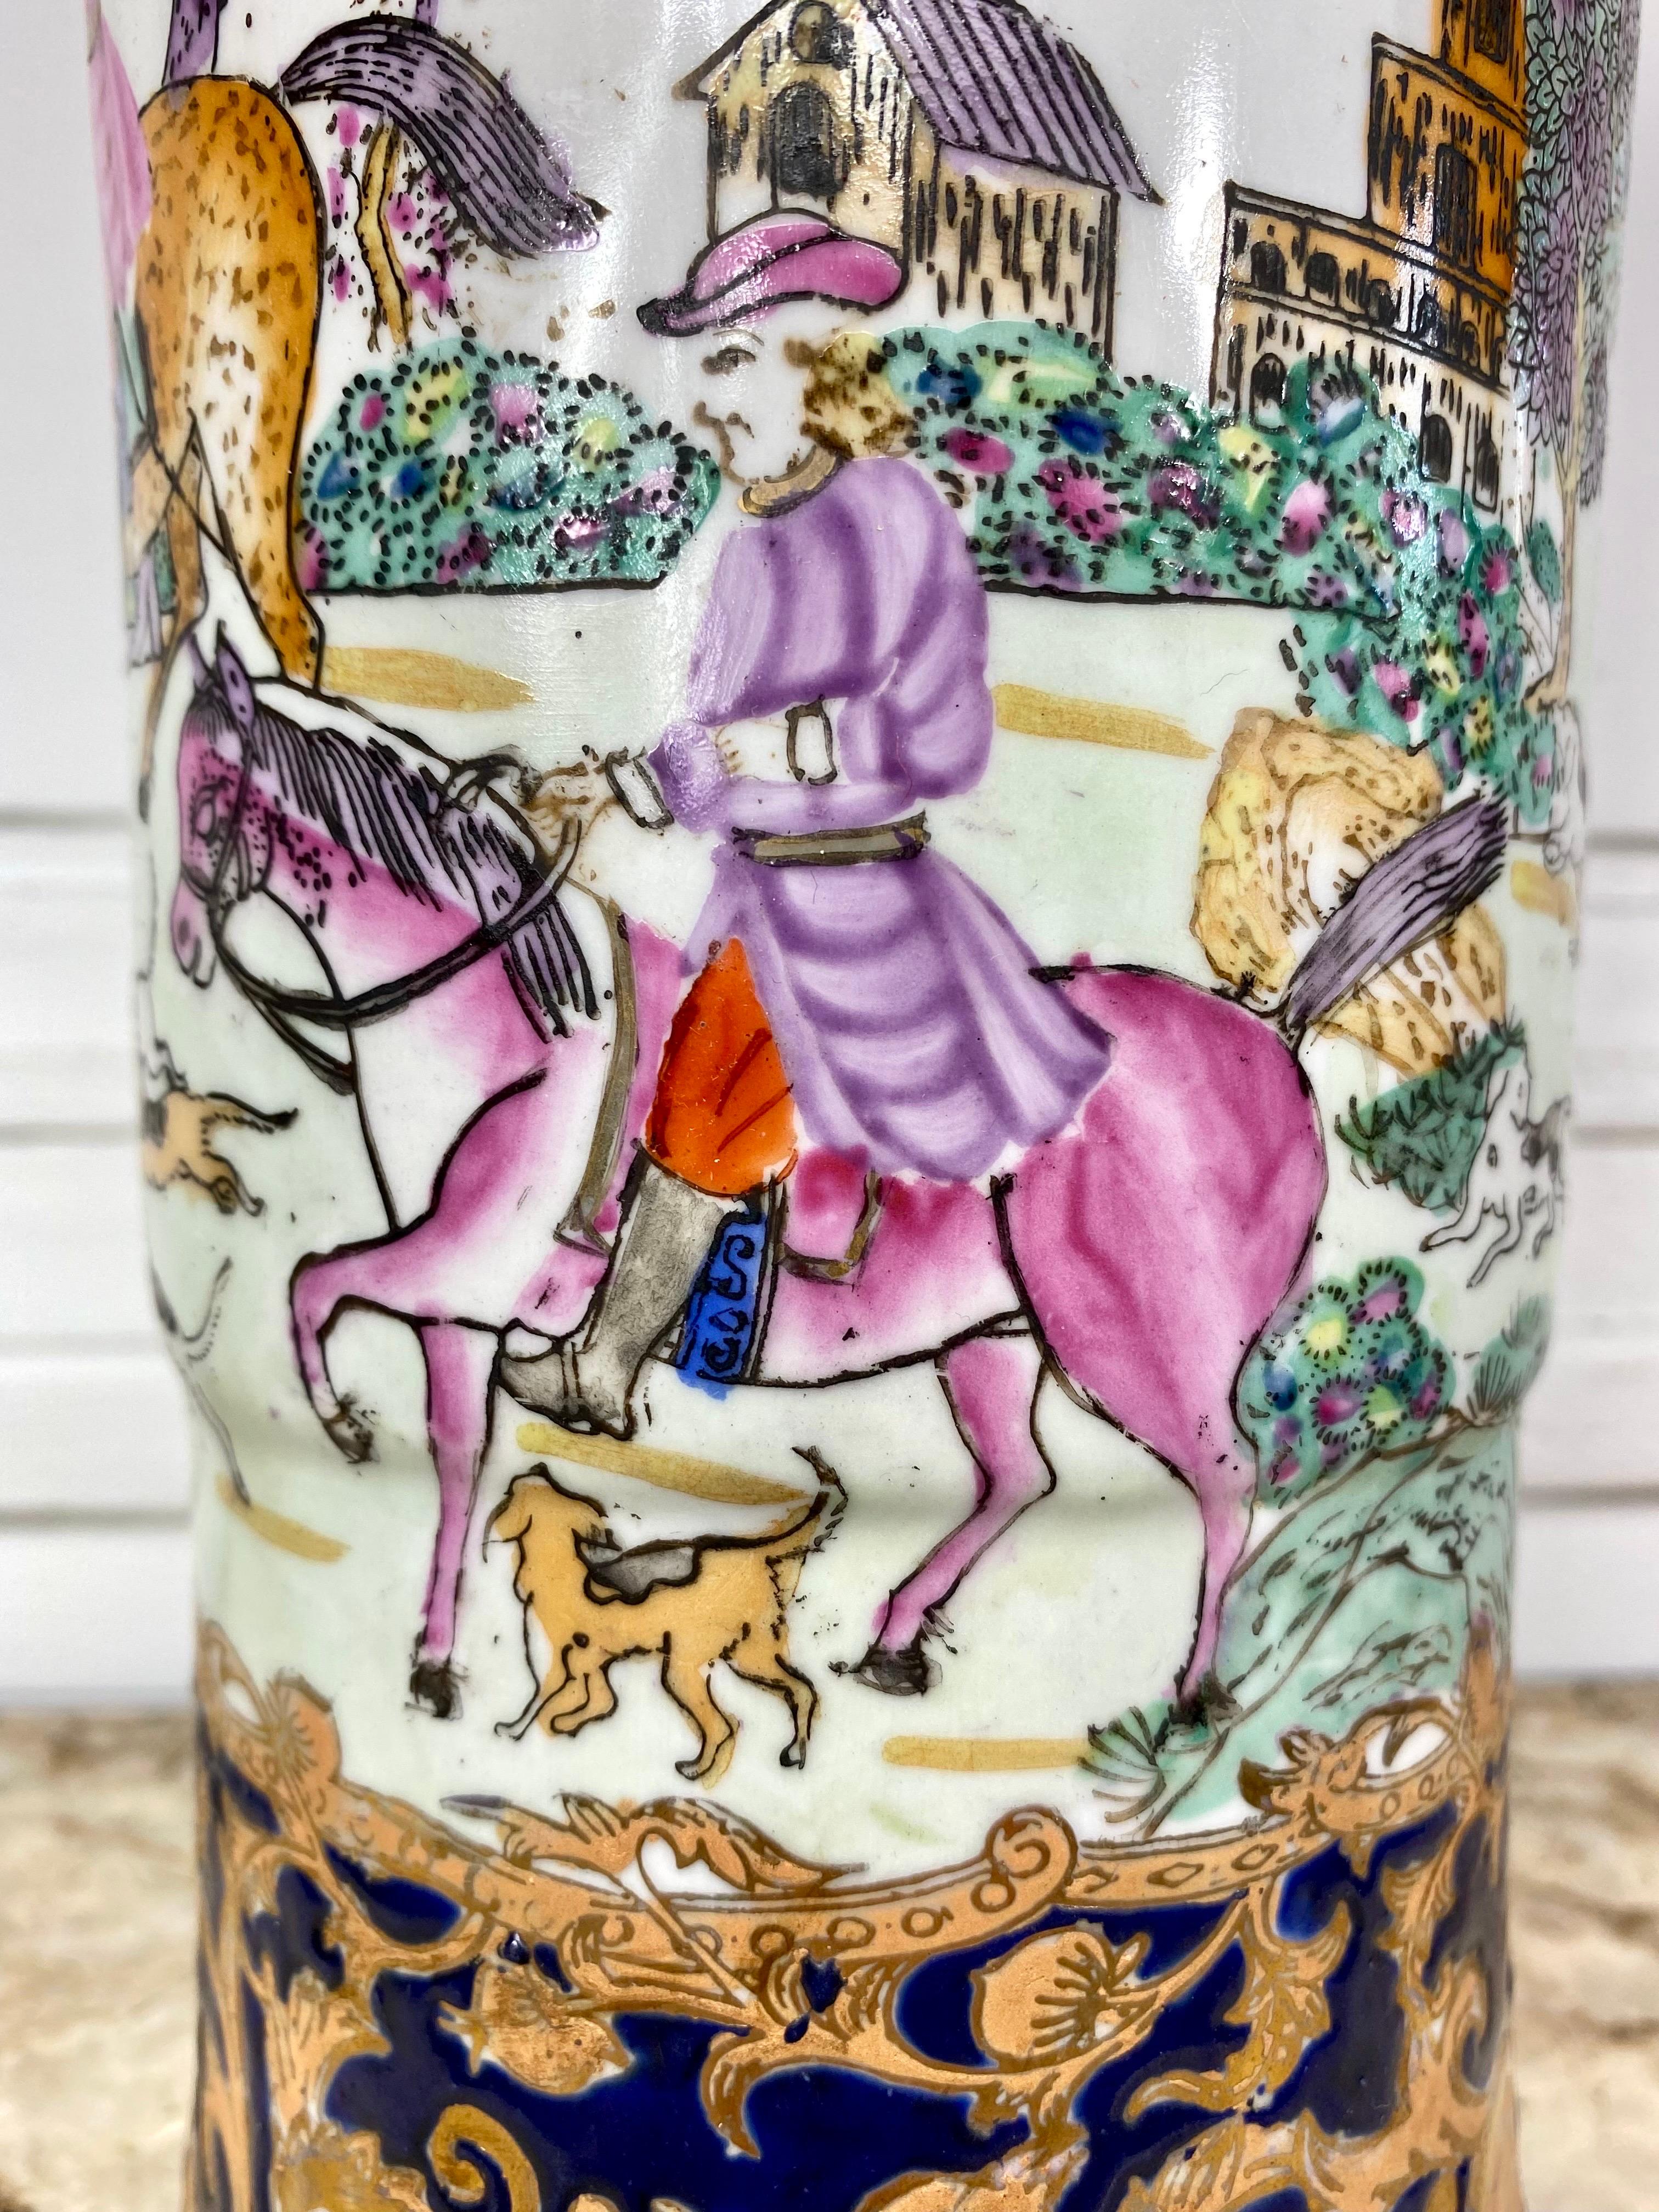 Large Chinese porcelain cornet vase decorated with a court hunting scene representing three men on horseback, one of them holding a hunting horn, the pack of dogs running at the foot of the horses. In the background, a city, probably Flemish since